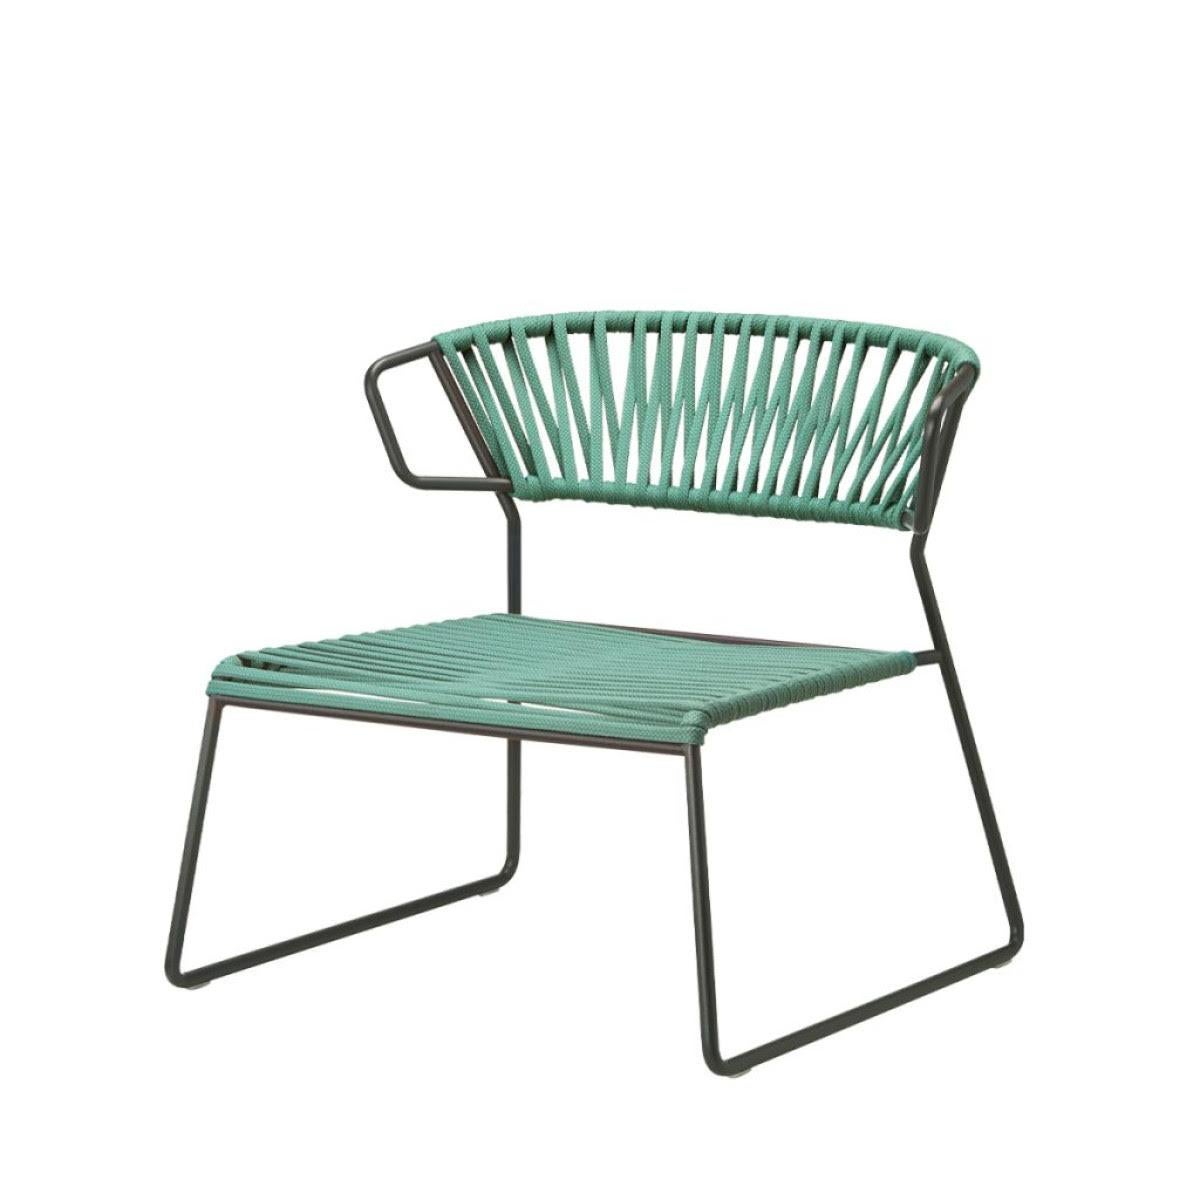 Contemporary Modern Green Outdoor or Indoor Armchair in Metal and Ropes, 21 century For Sale